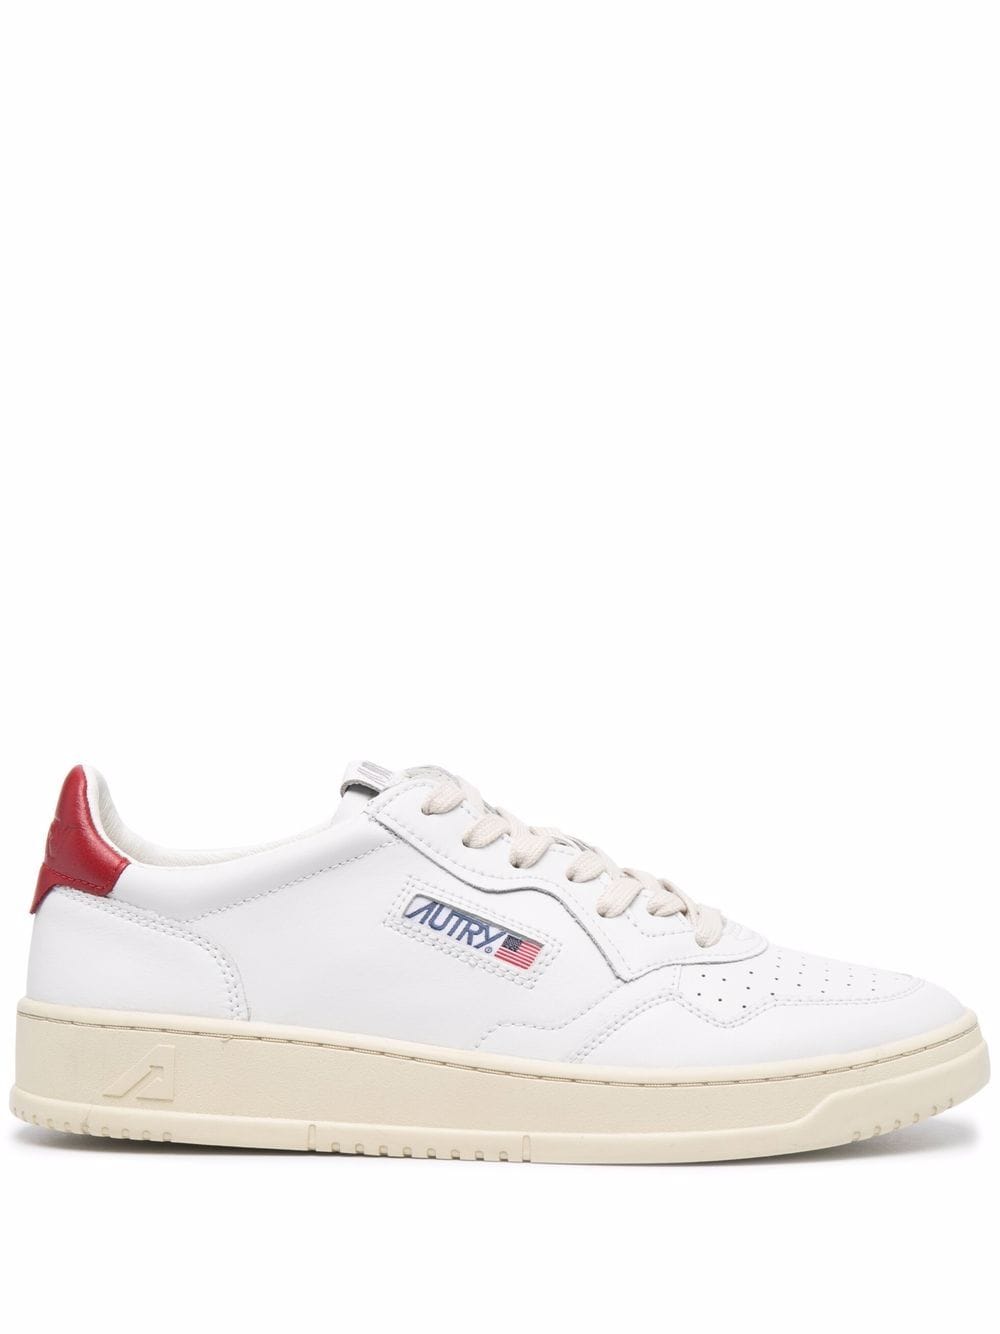 Bright white/red leather Medalist low-top sneakers